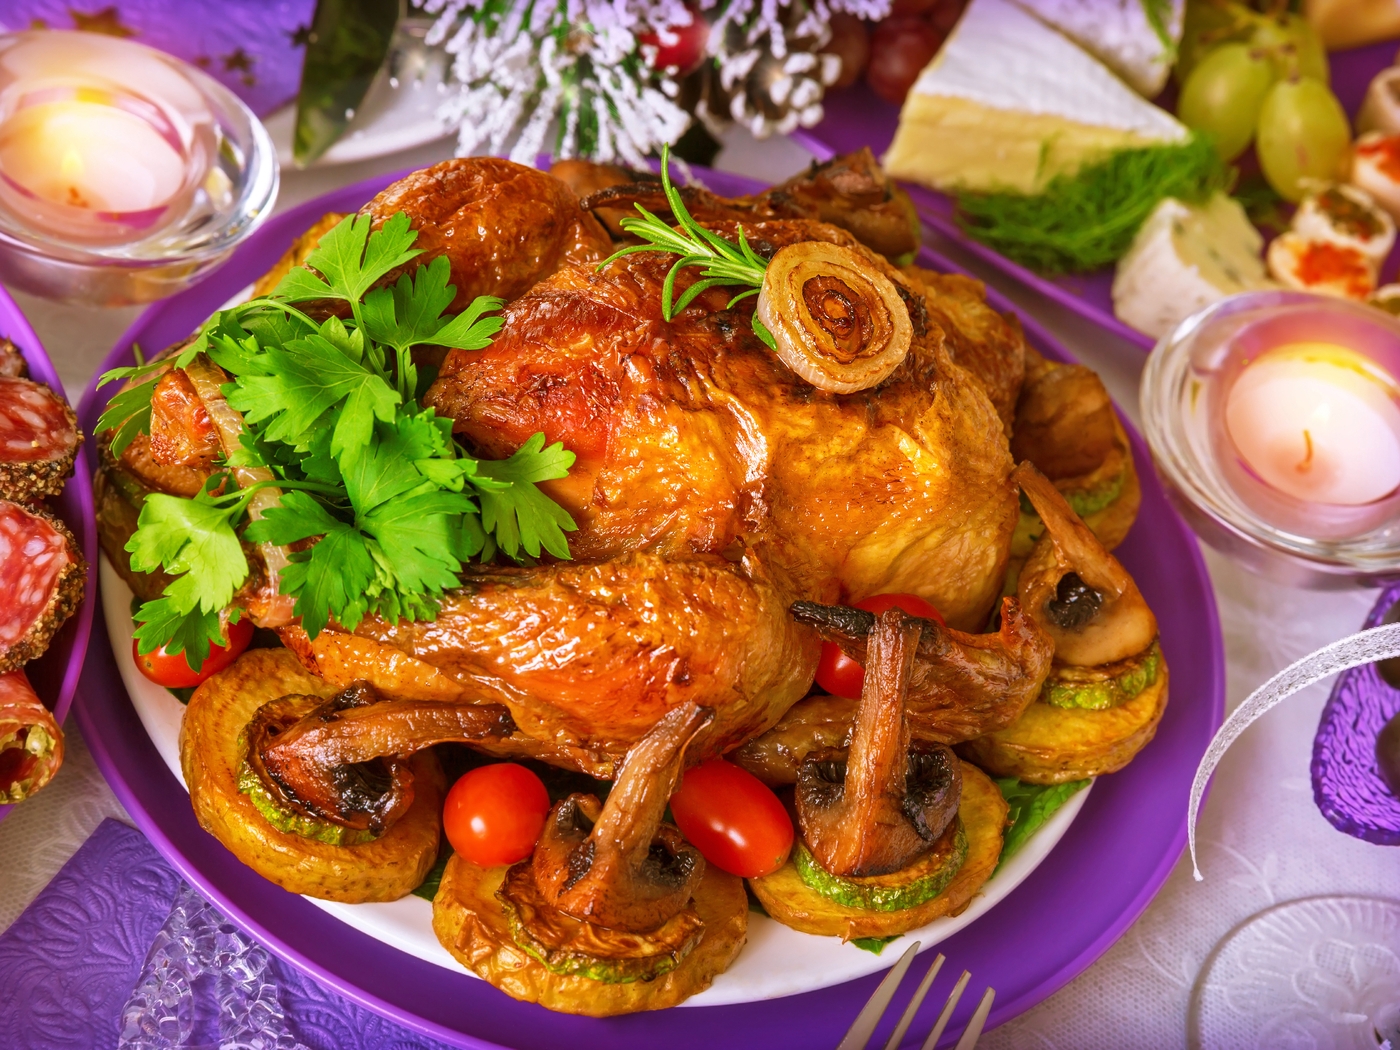 Image: Dish, chicken, parsley, tomatoes, mushrooms, candles, feast